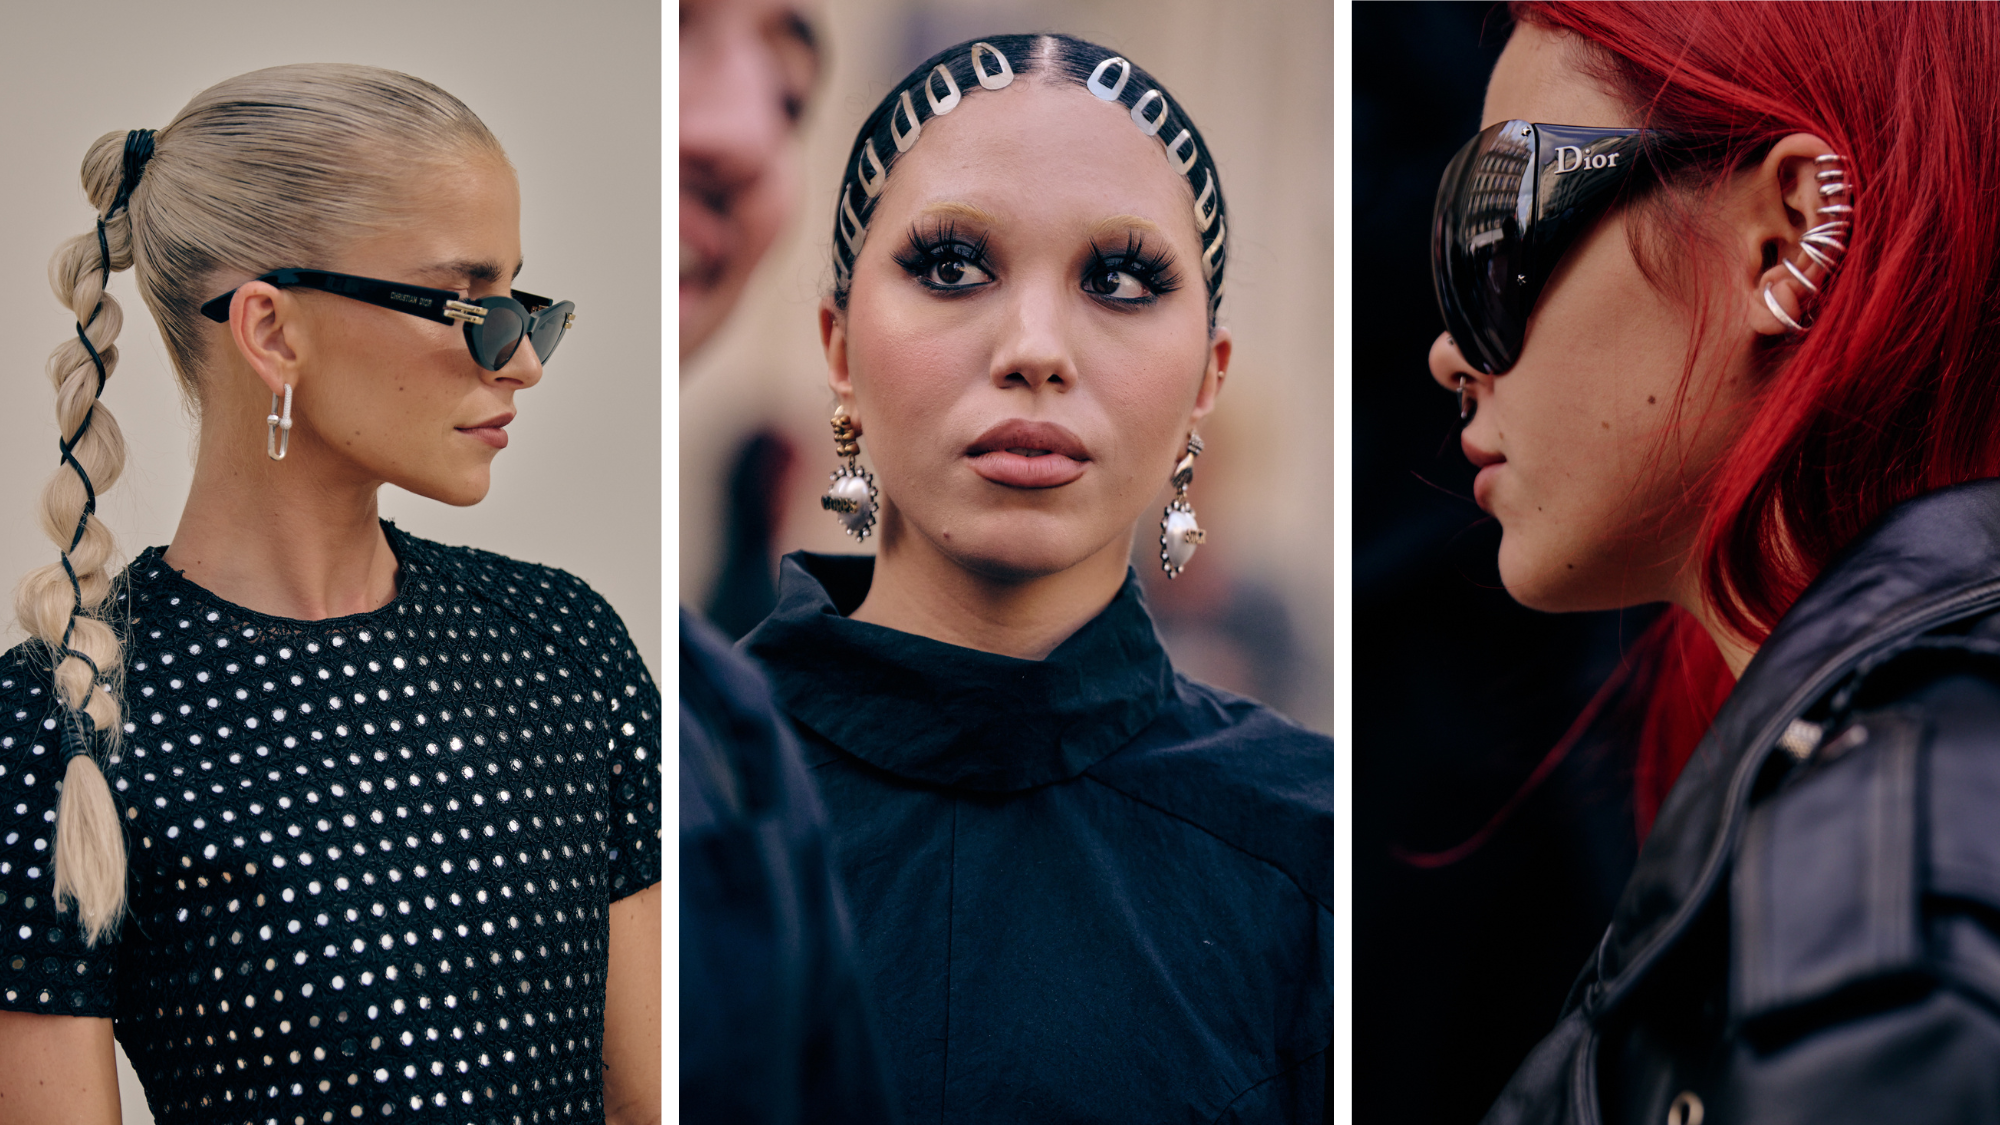 Paris Fashion Week’s Street Style Is Paying Due Respect to Beauty